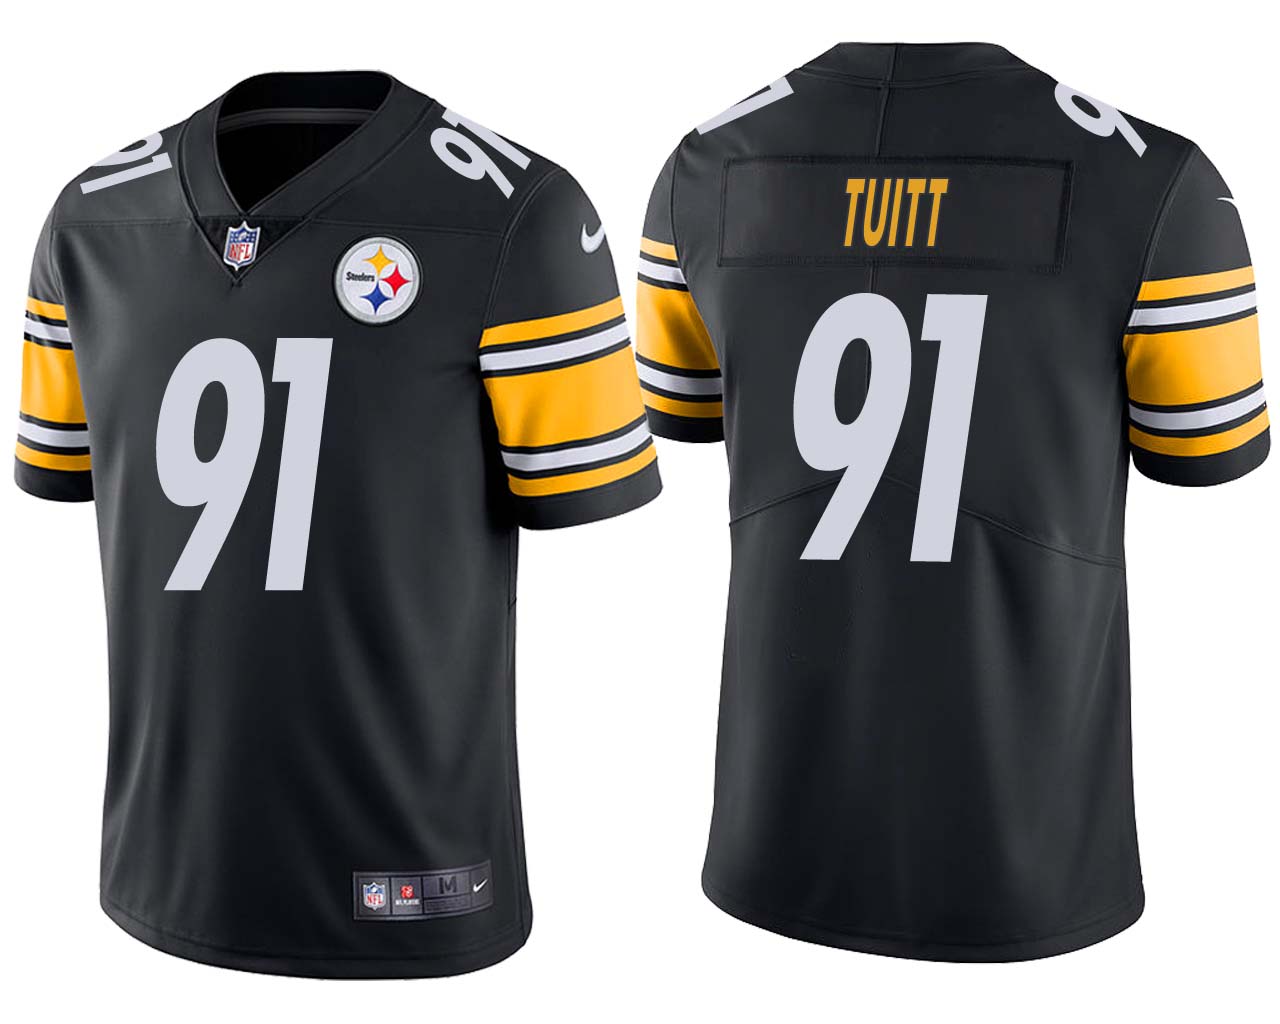 Men's Pittsburgh Steelers Black #91 Stephon Tuitt Vapor Untouchable Limited Stitched NFL Jersey